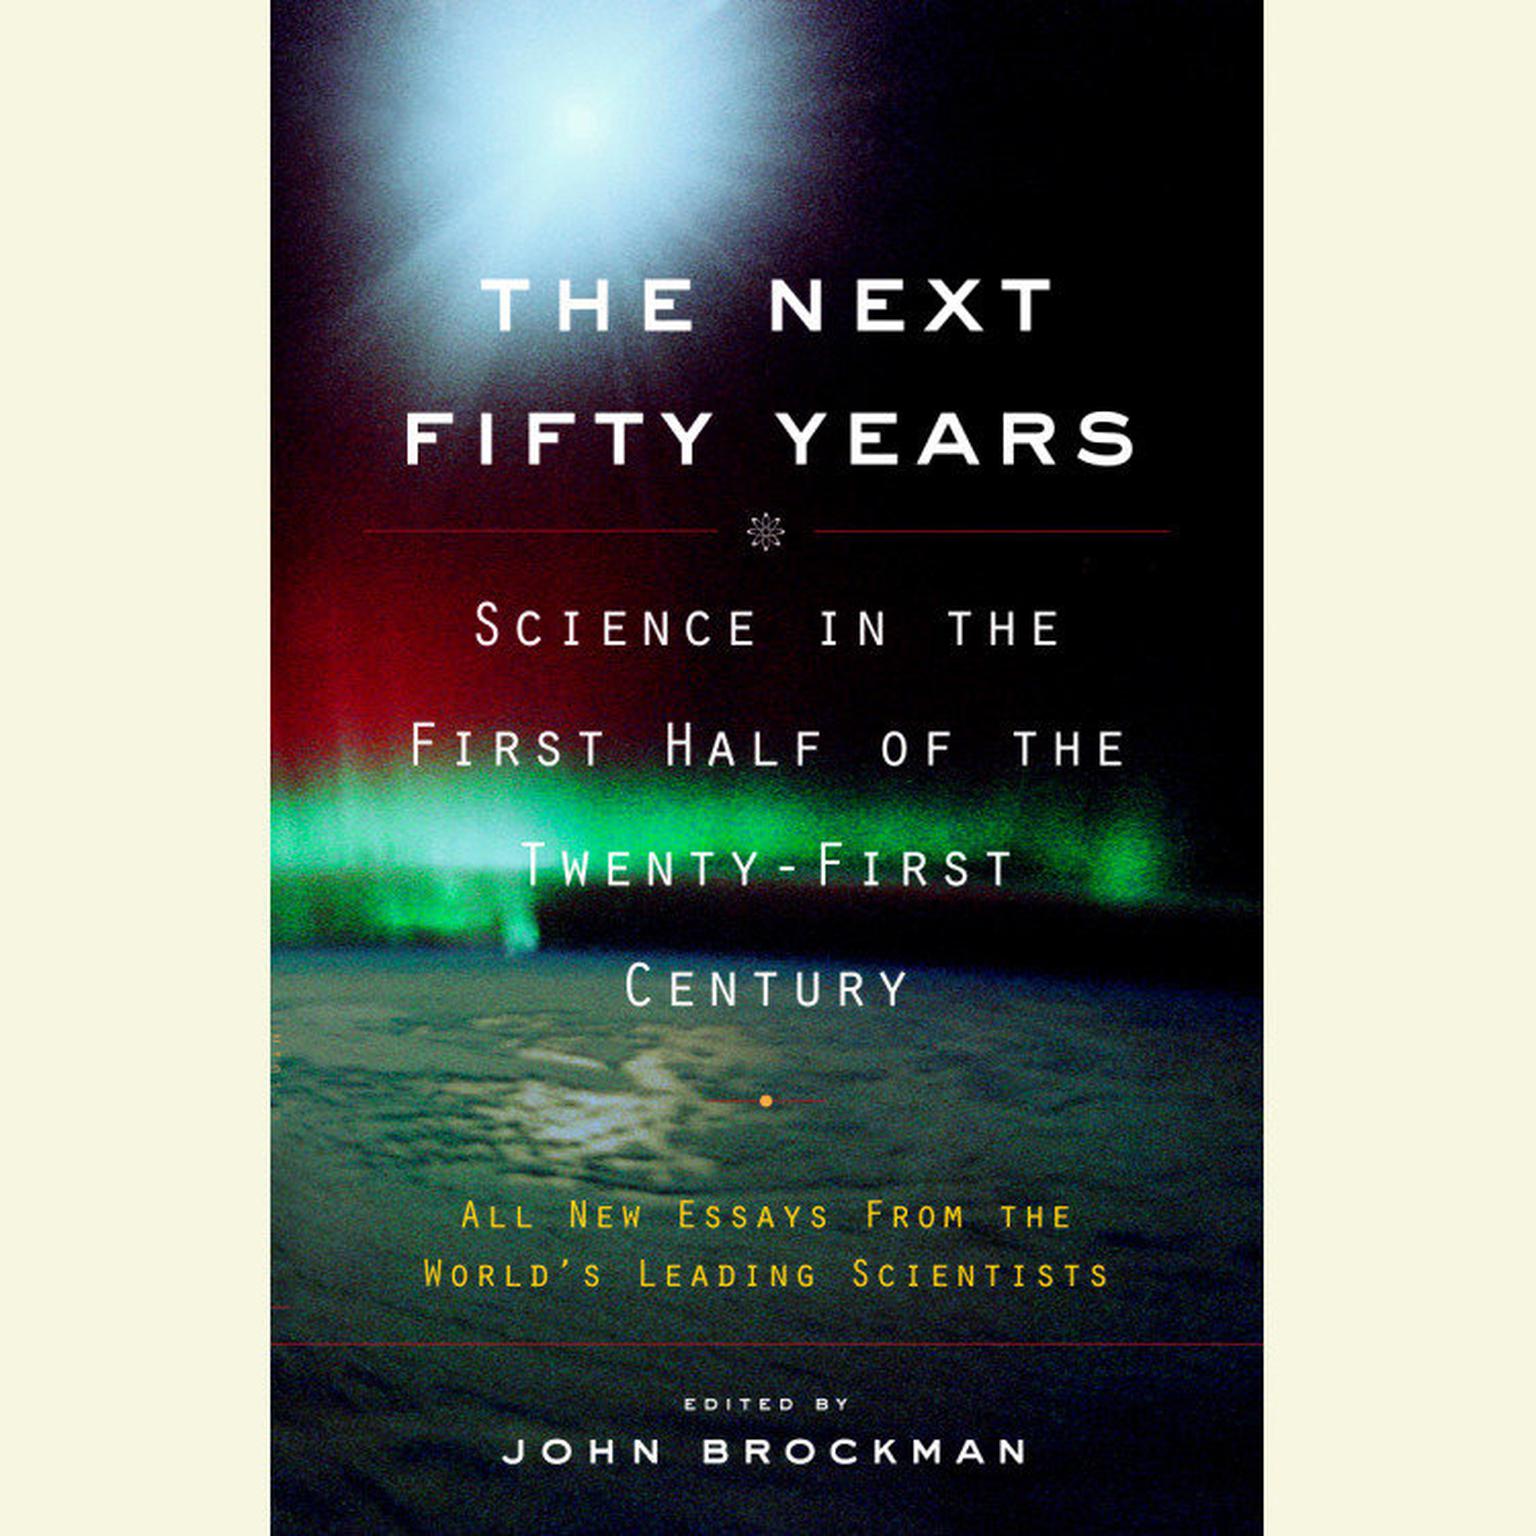 The Next Fifty Years (Abridged): Science in the First Half of the Twenty-First Century Audiobook, by John Brockman